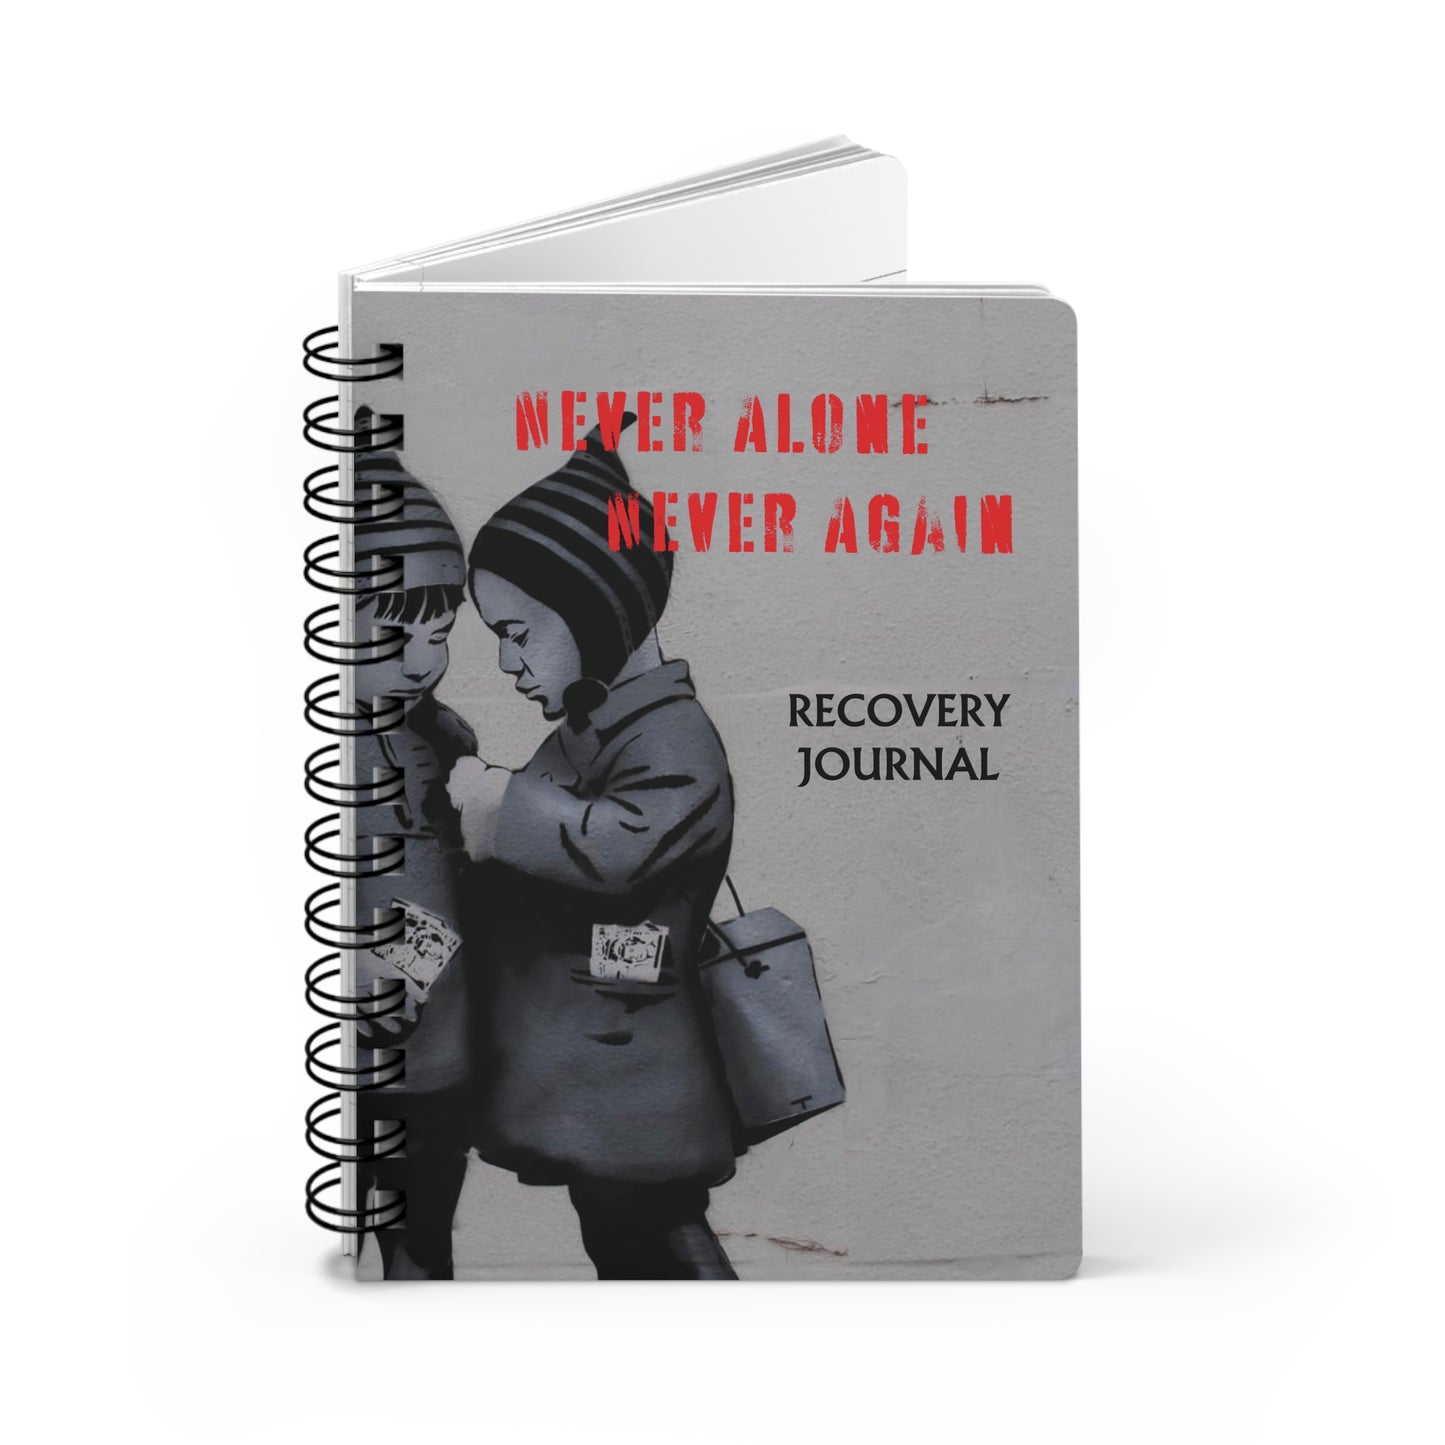 "Never Alone Never Again" Recovery Journal